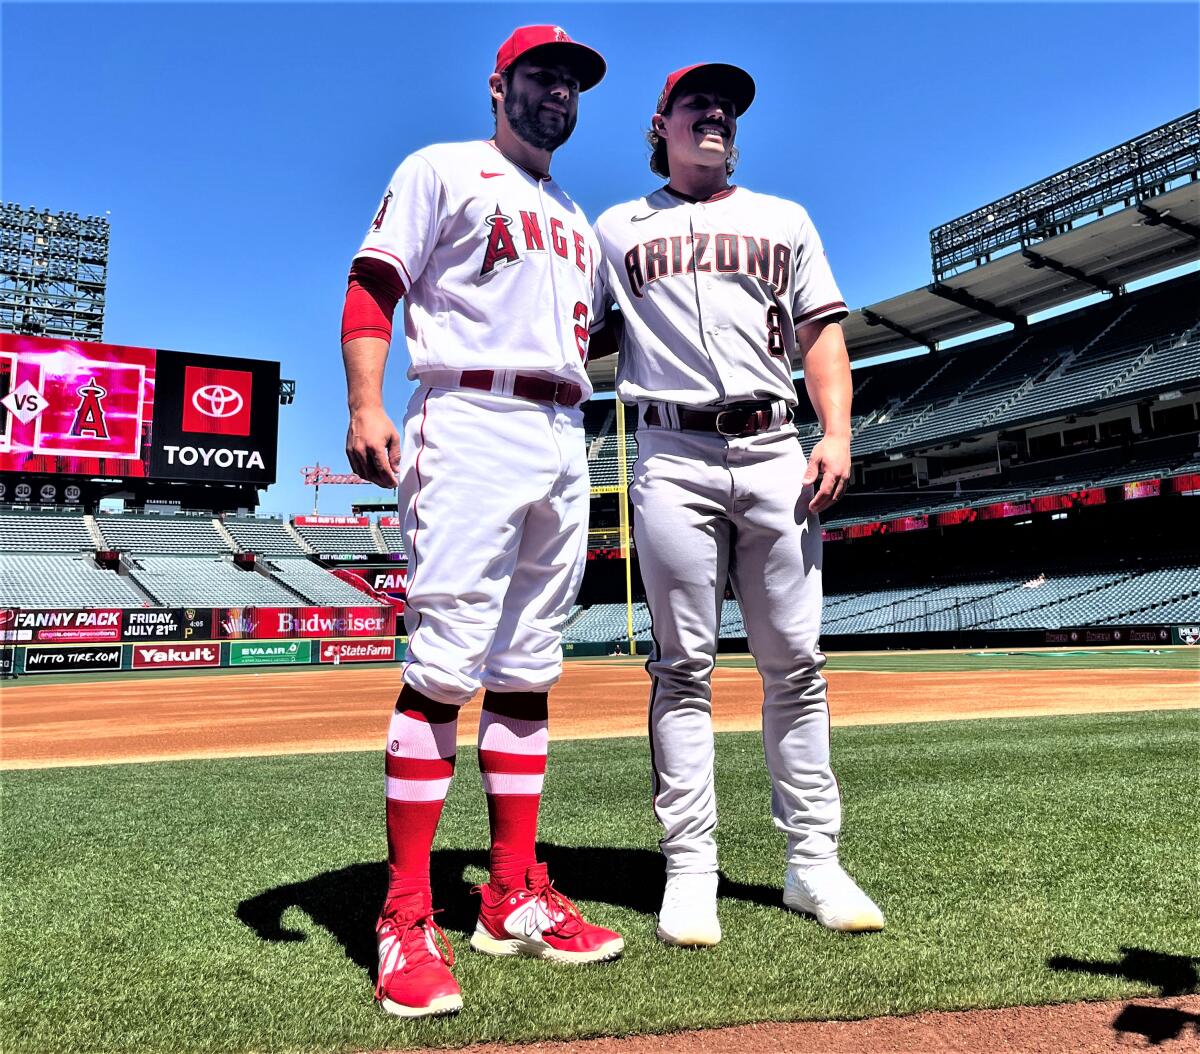 Diamondbacks get new uniforms for Mother's Day, Father's Day